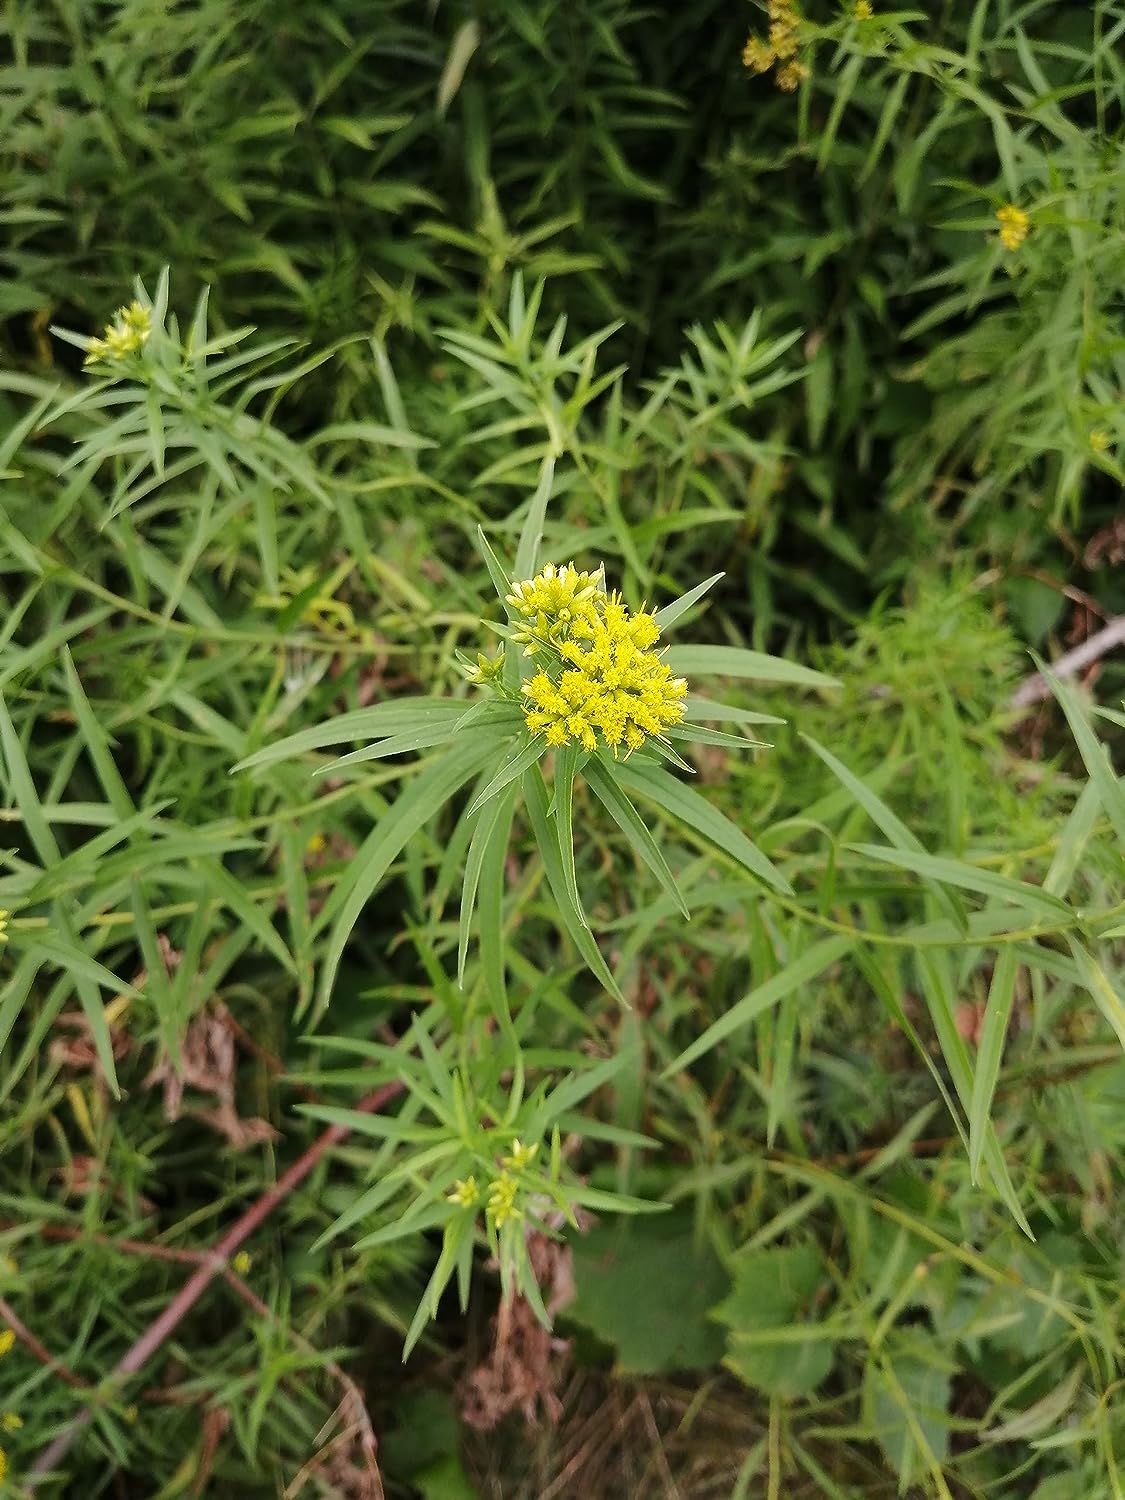 Hundredfold Riddell's Goldenrod 500 Seeds - Solidago riddellii Ontario Native Wildflower Wild Flower, Attract Bees and Butterflies